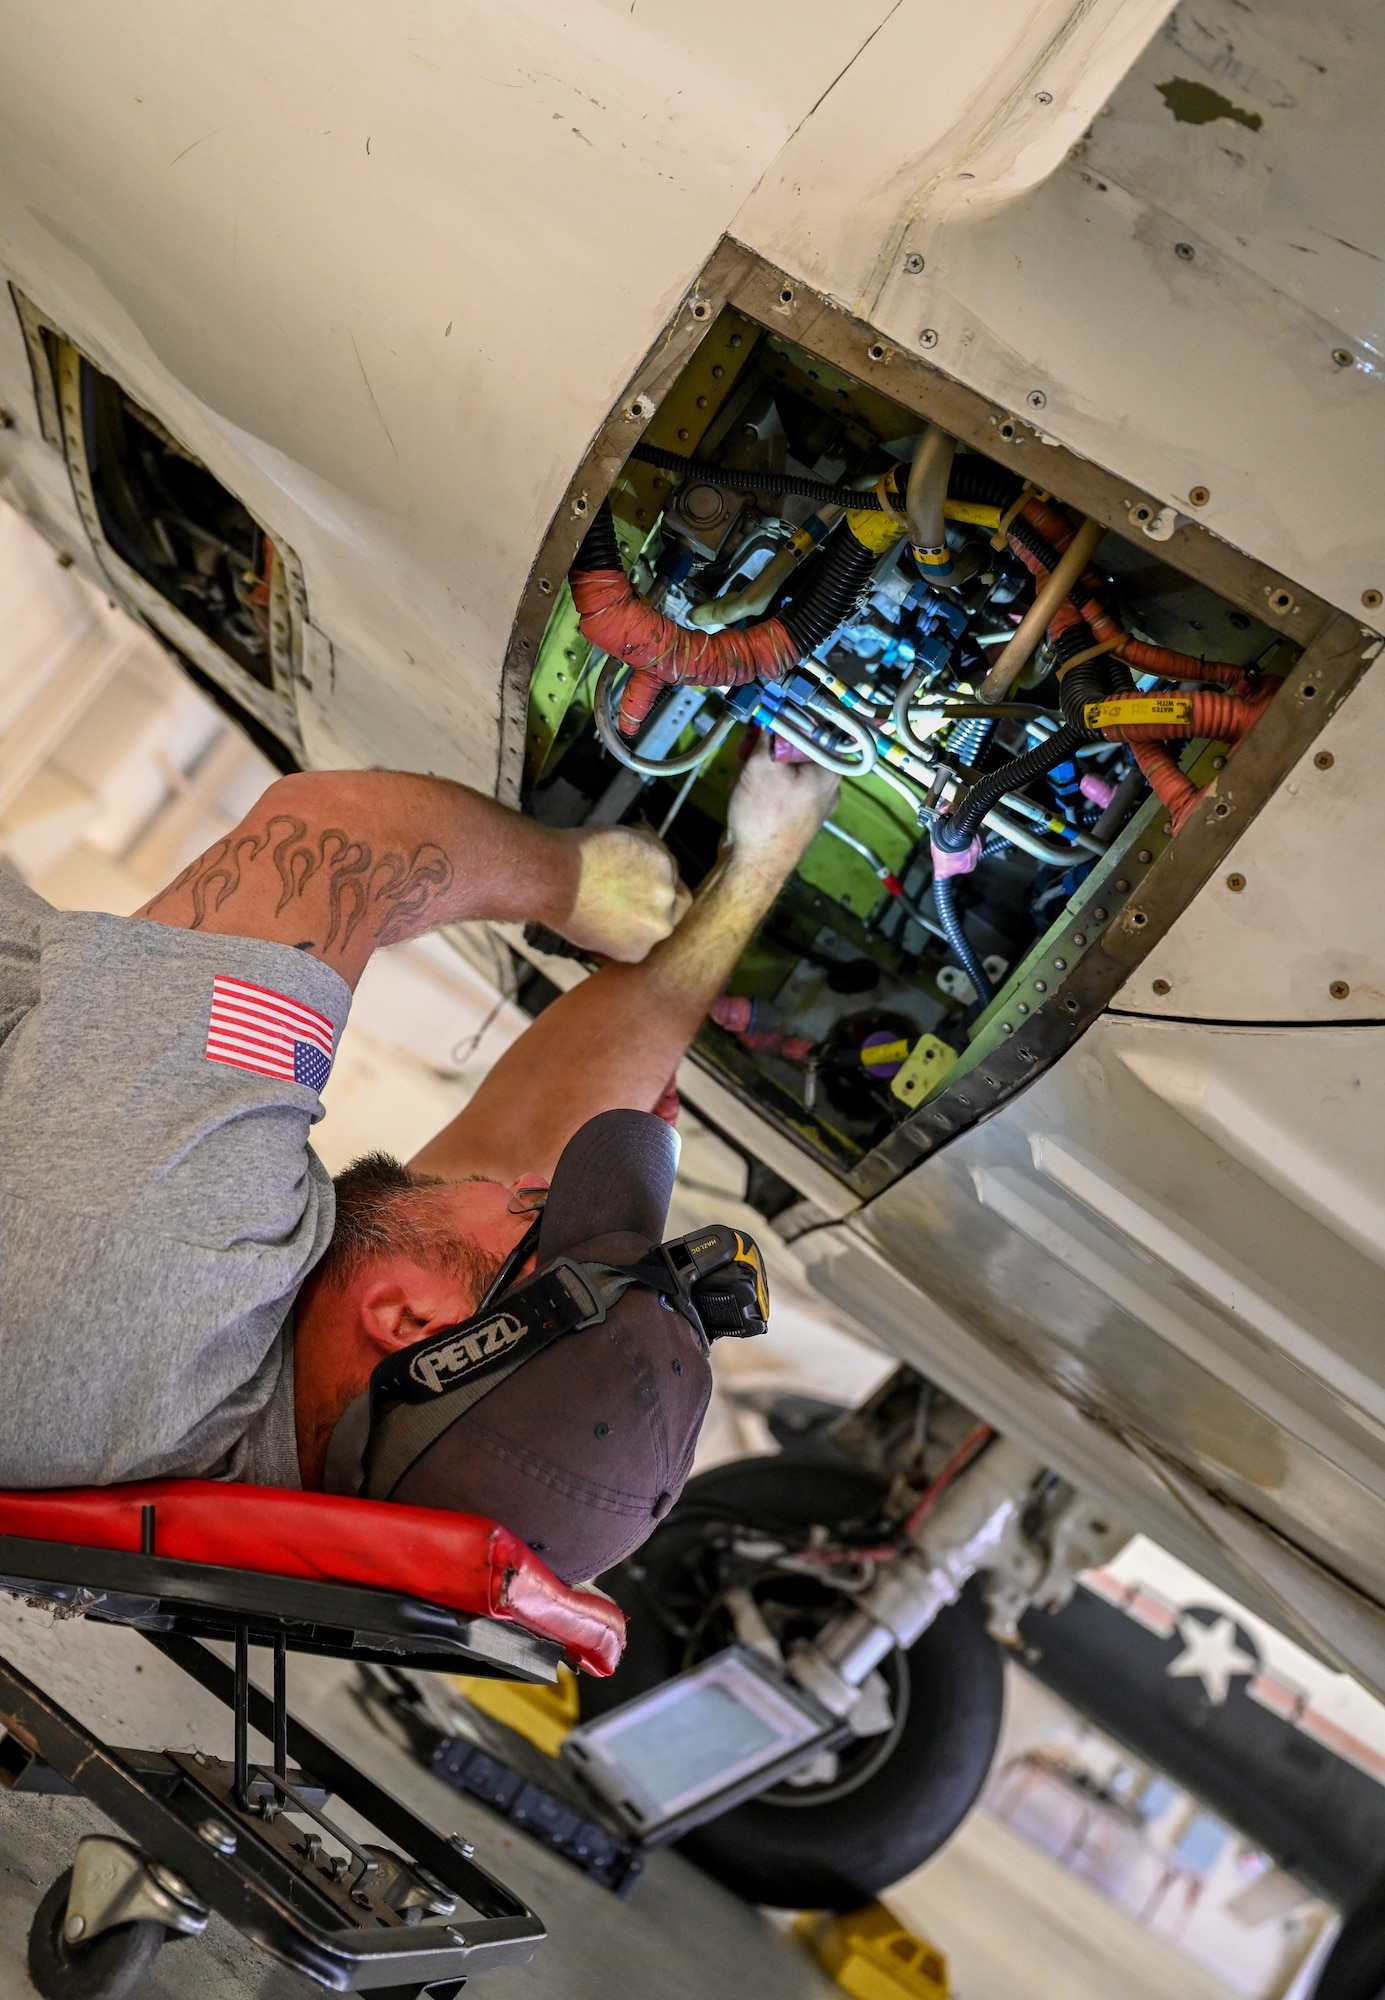 Jason Nesser, M1 Support Services fuel systems lead, inspects the fuel system of a T-6A Texan II on Oct. 29, 2020, at Columbus Air Force Base, Miss. Because of its excellent thrust-to-weight ratio, the T-6 can perform an initial climb of 3,100 feet (944.8 meters) per minute and can reach 18,000 feet (5,486.4 meters) in less than six minutes. (U.S. Air Force photo by Airman 1st Class Davis Donaldson)